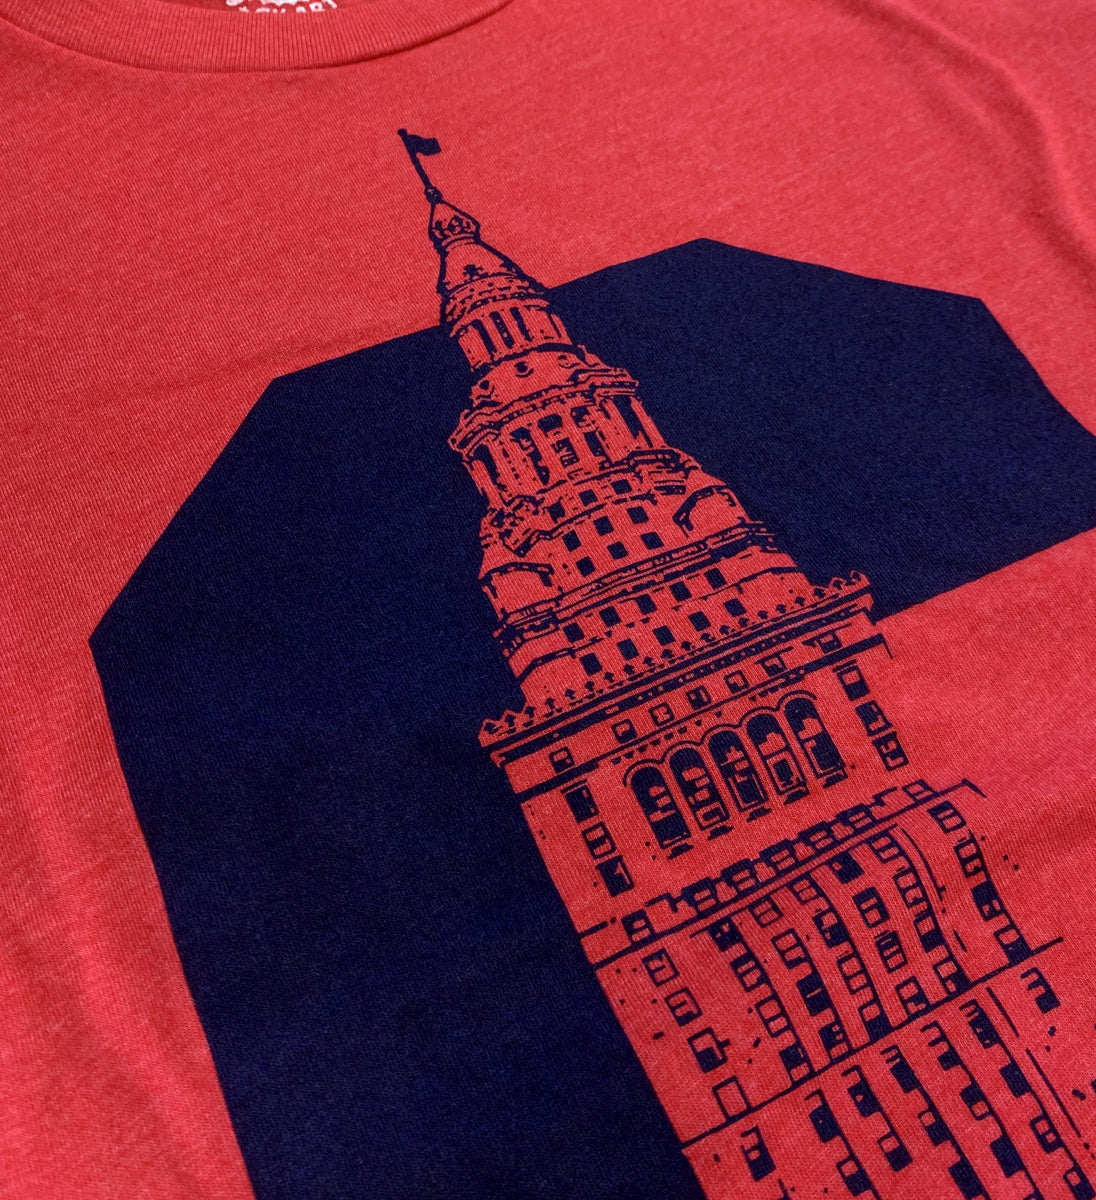 Cleveland C Terminal Tower T shirt Red and Navy